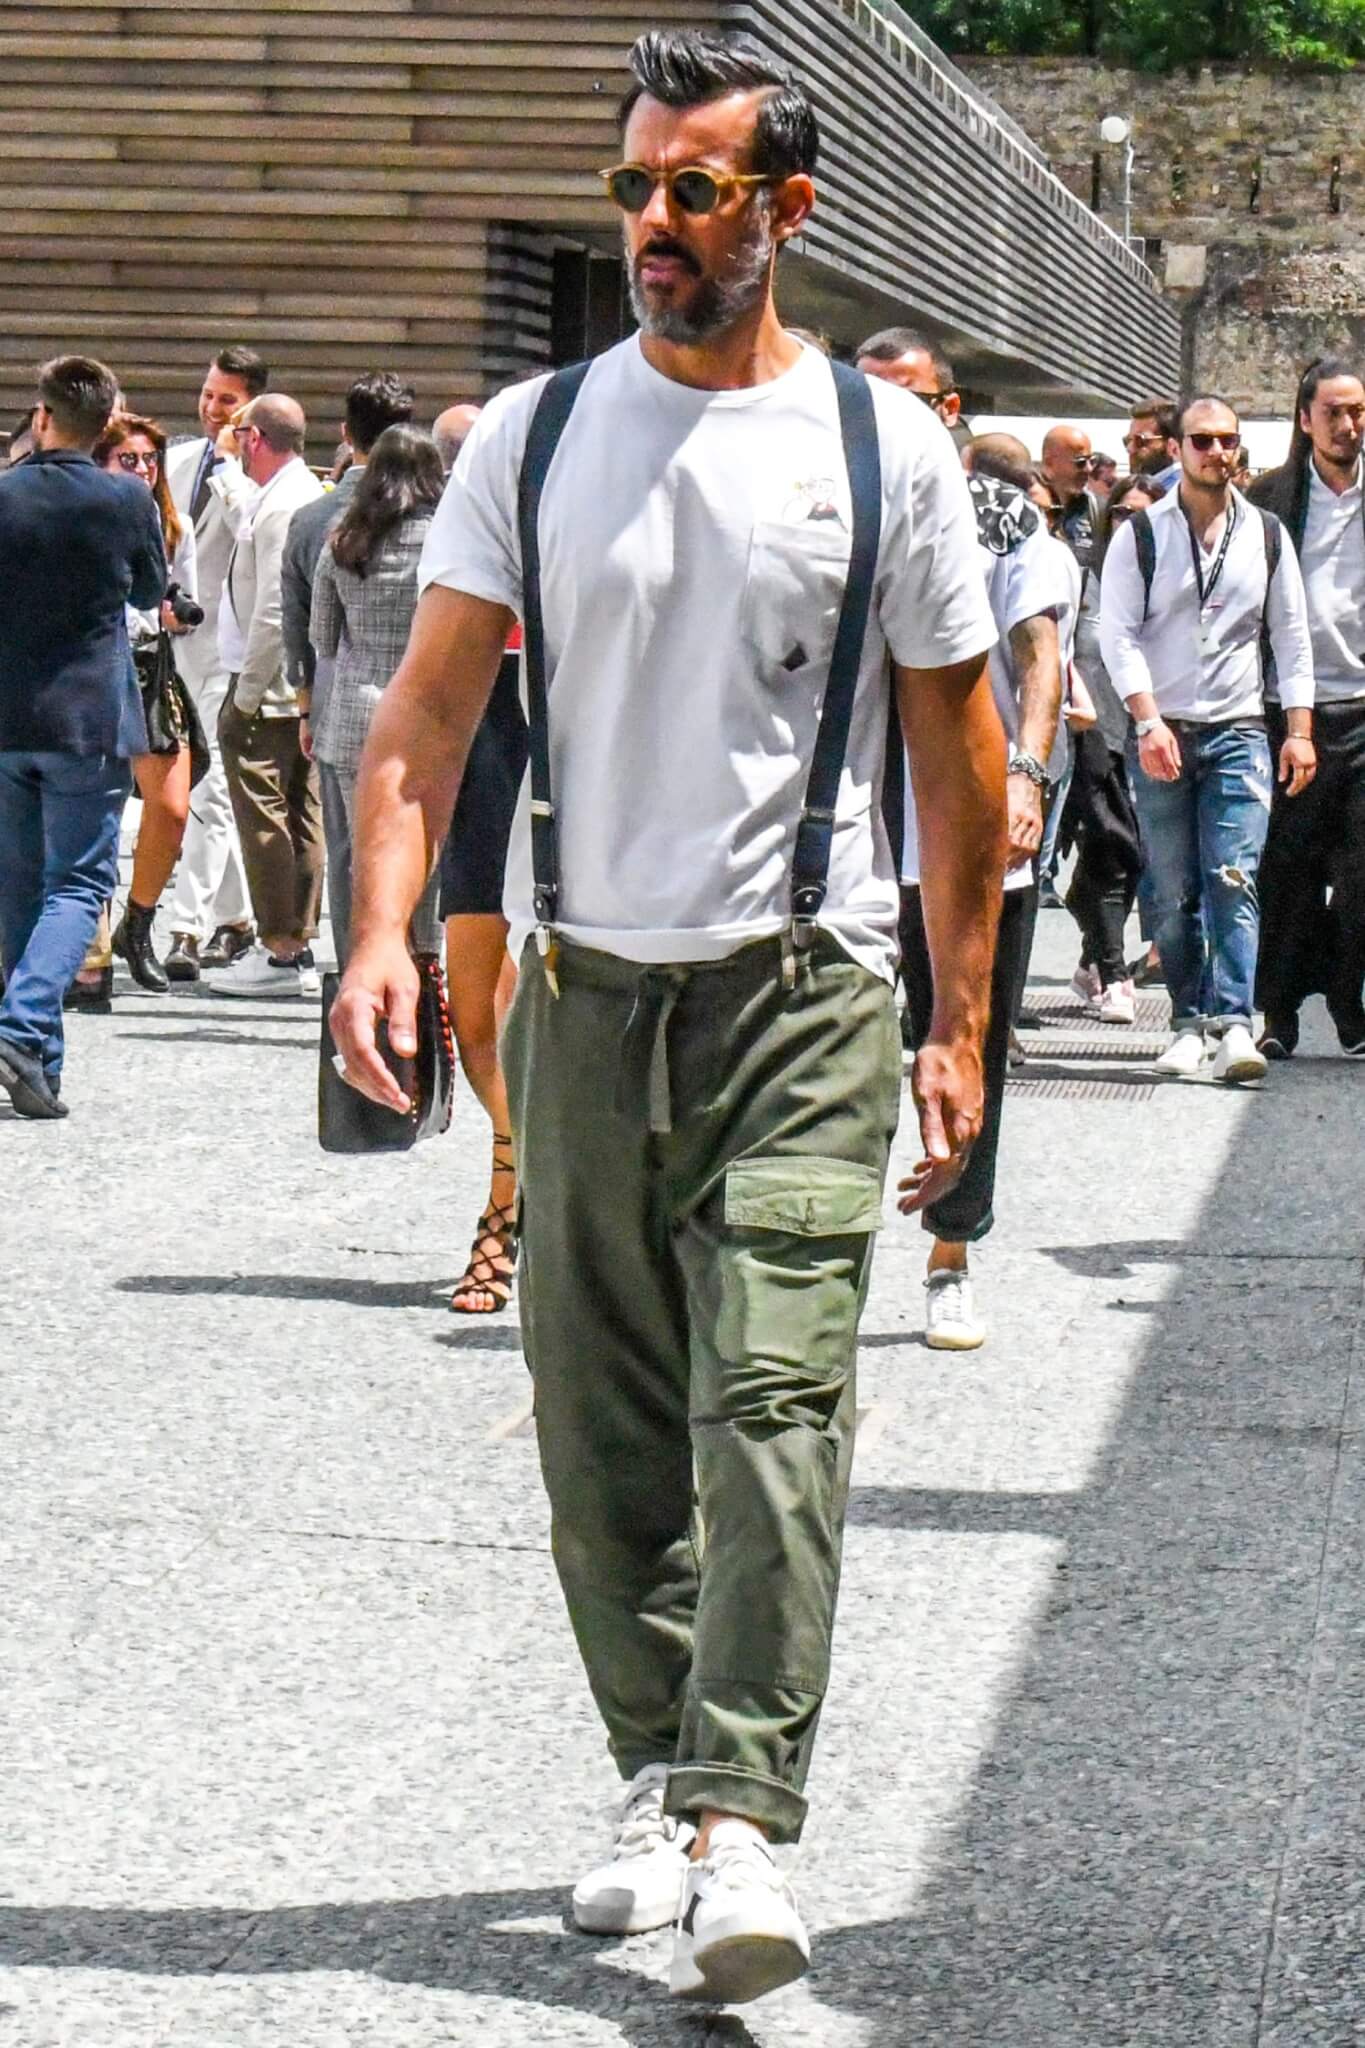 Suspenders (Braceys) give men's coordination a sophisticated look! [  Increased attention due to the return to the classics ].